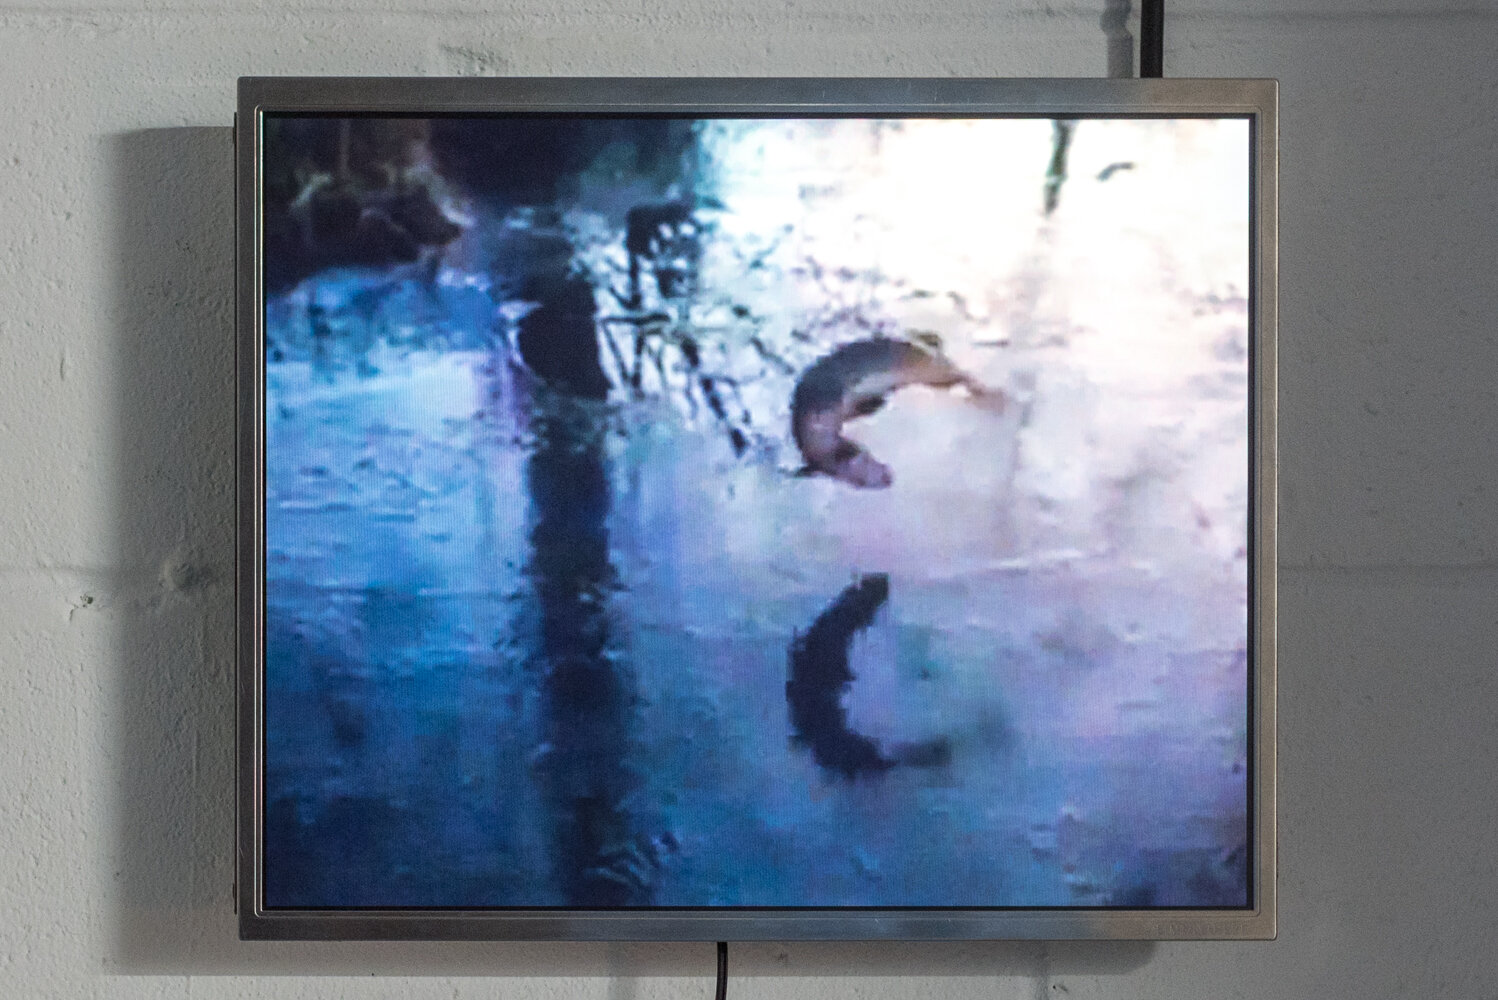  Brandon Poole, ‘ fish jumping on ice ’, 2018. Found video and music, screens, 27s infinite loop, 14x11.5in 